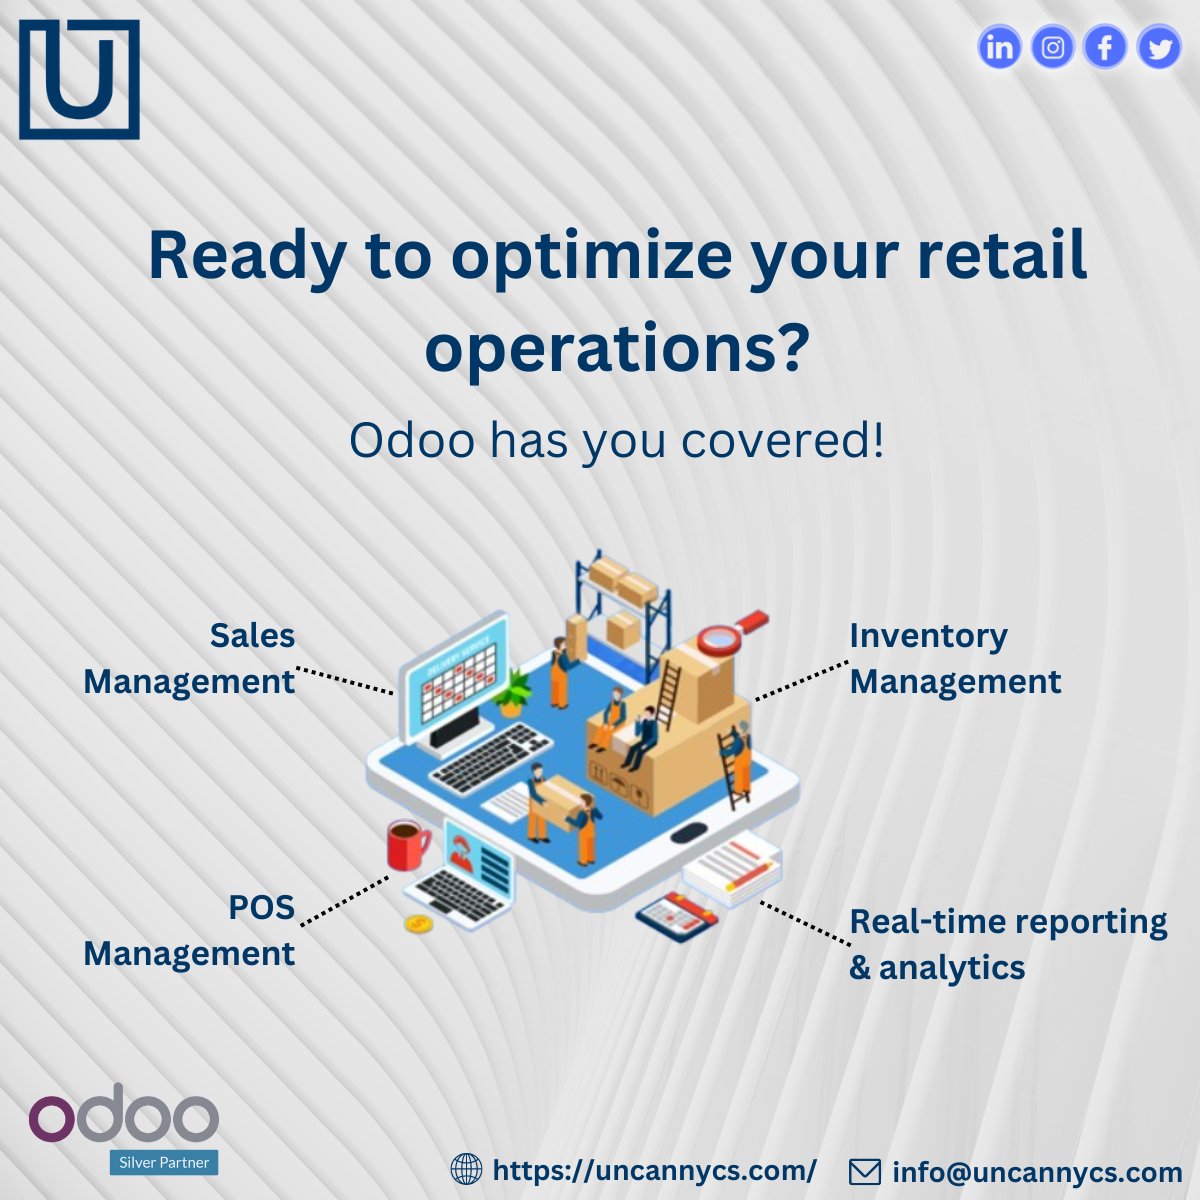 Want to unlock the full potential of your retail business? Choose Odoo.

It can streamline every aspect of your operations. 
🔗 uncannycs.com/why-odoo/

#Uncannycs #odoo #OdooRetail #retailmanagement #businesssoftware #retailtech #inventorymanagement #customermanagement